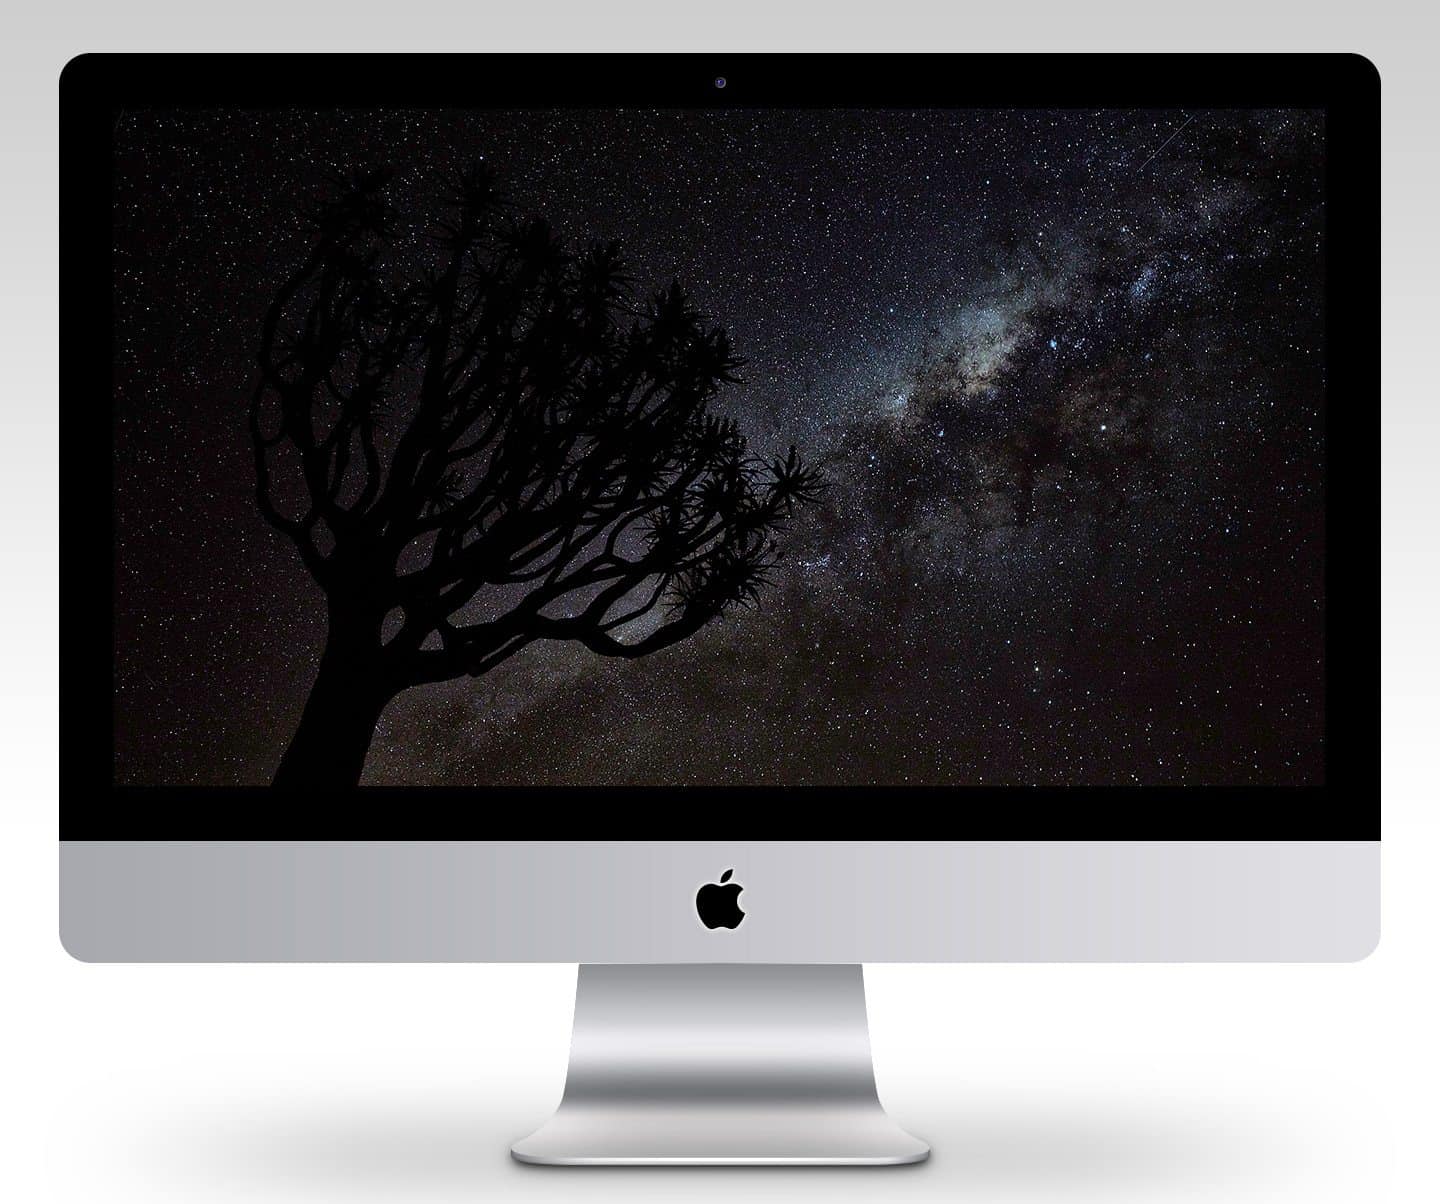 Quiver Tree and Milky Way Wallpaper